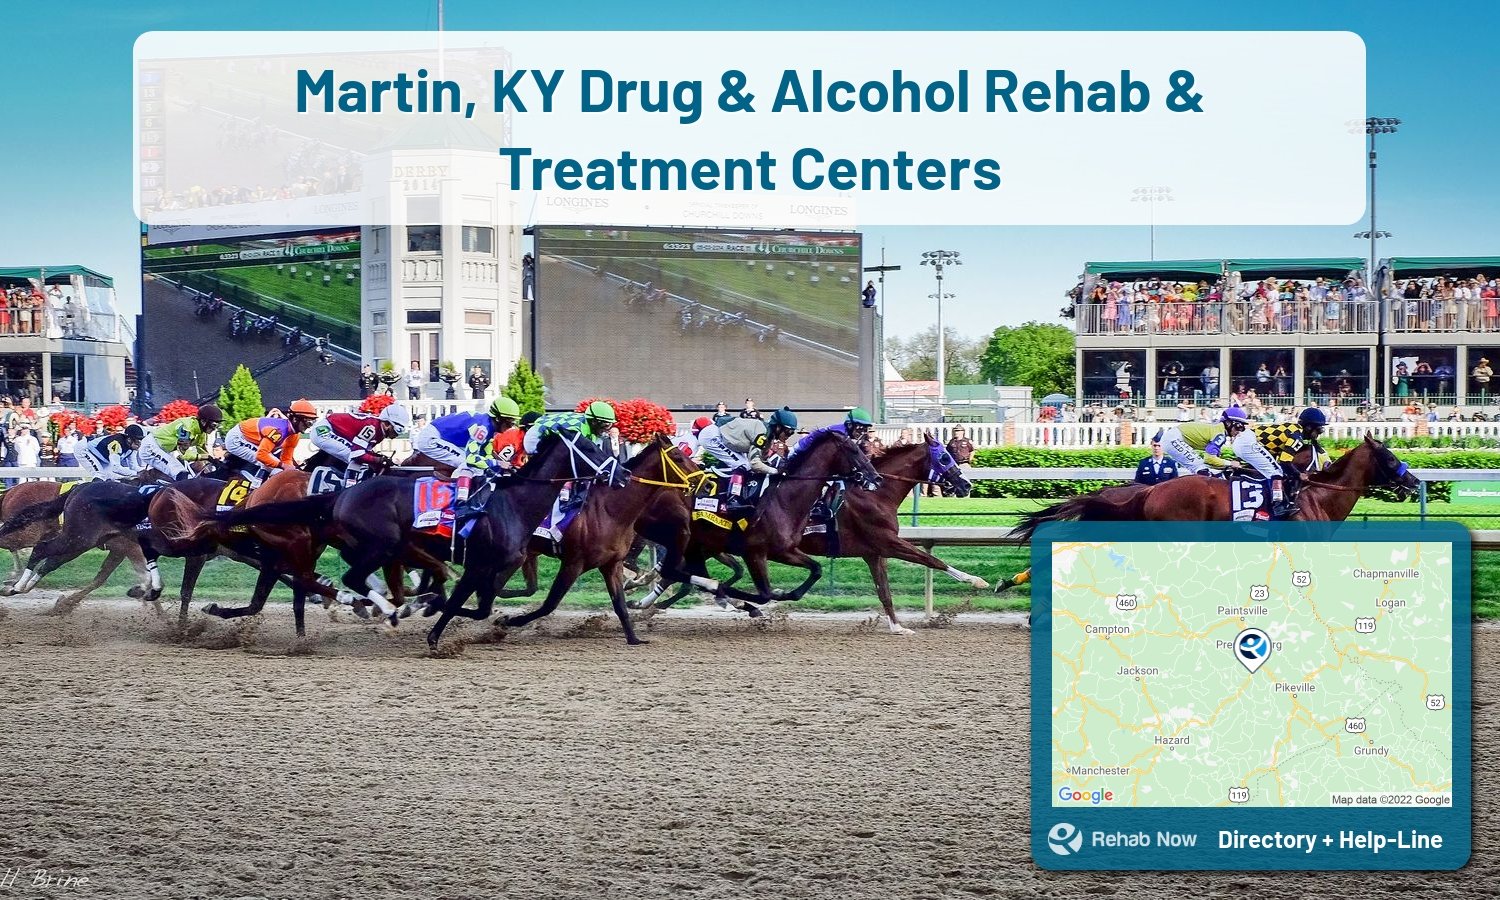 View options, availability, treatment methods, and more, for drug rehab and alcohol treatment in Martin, Kentucky